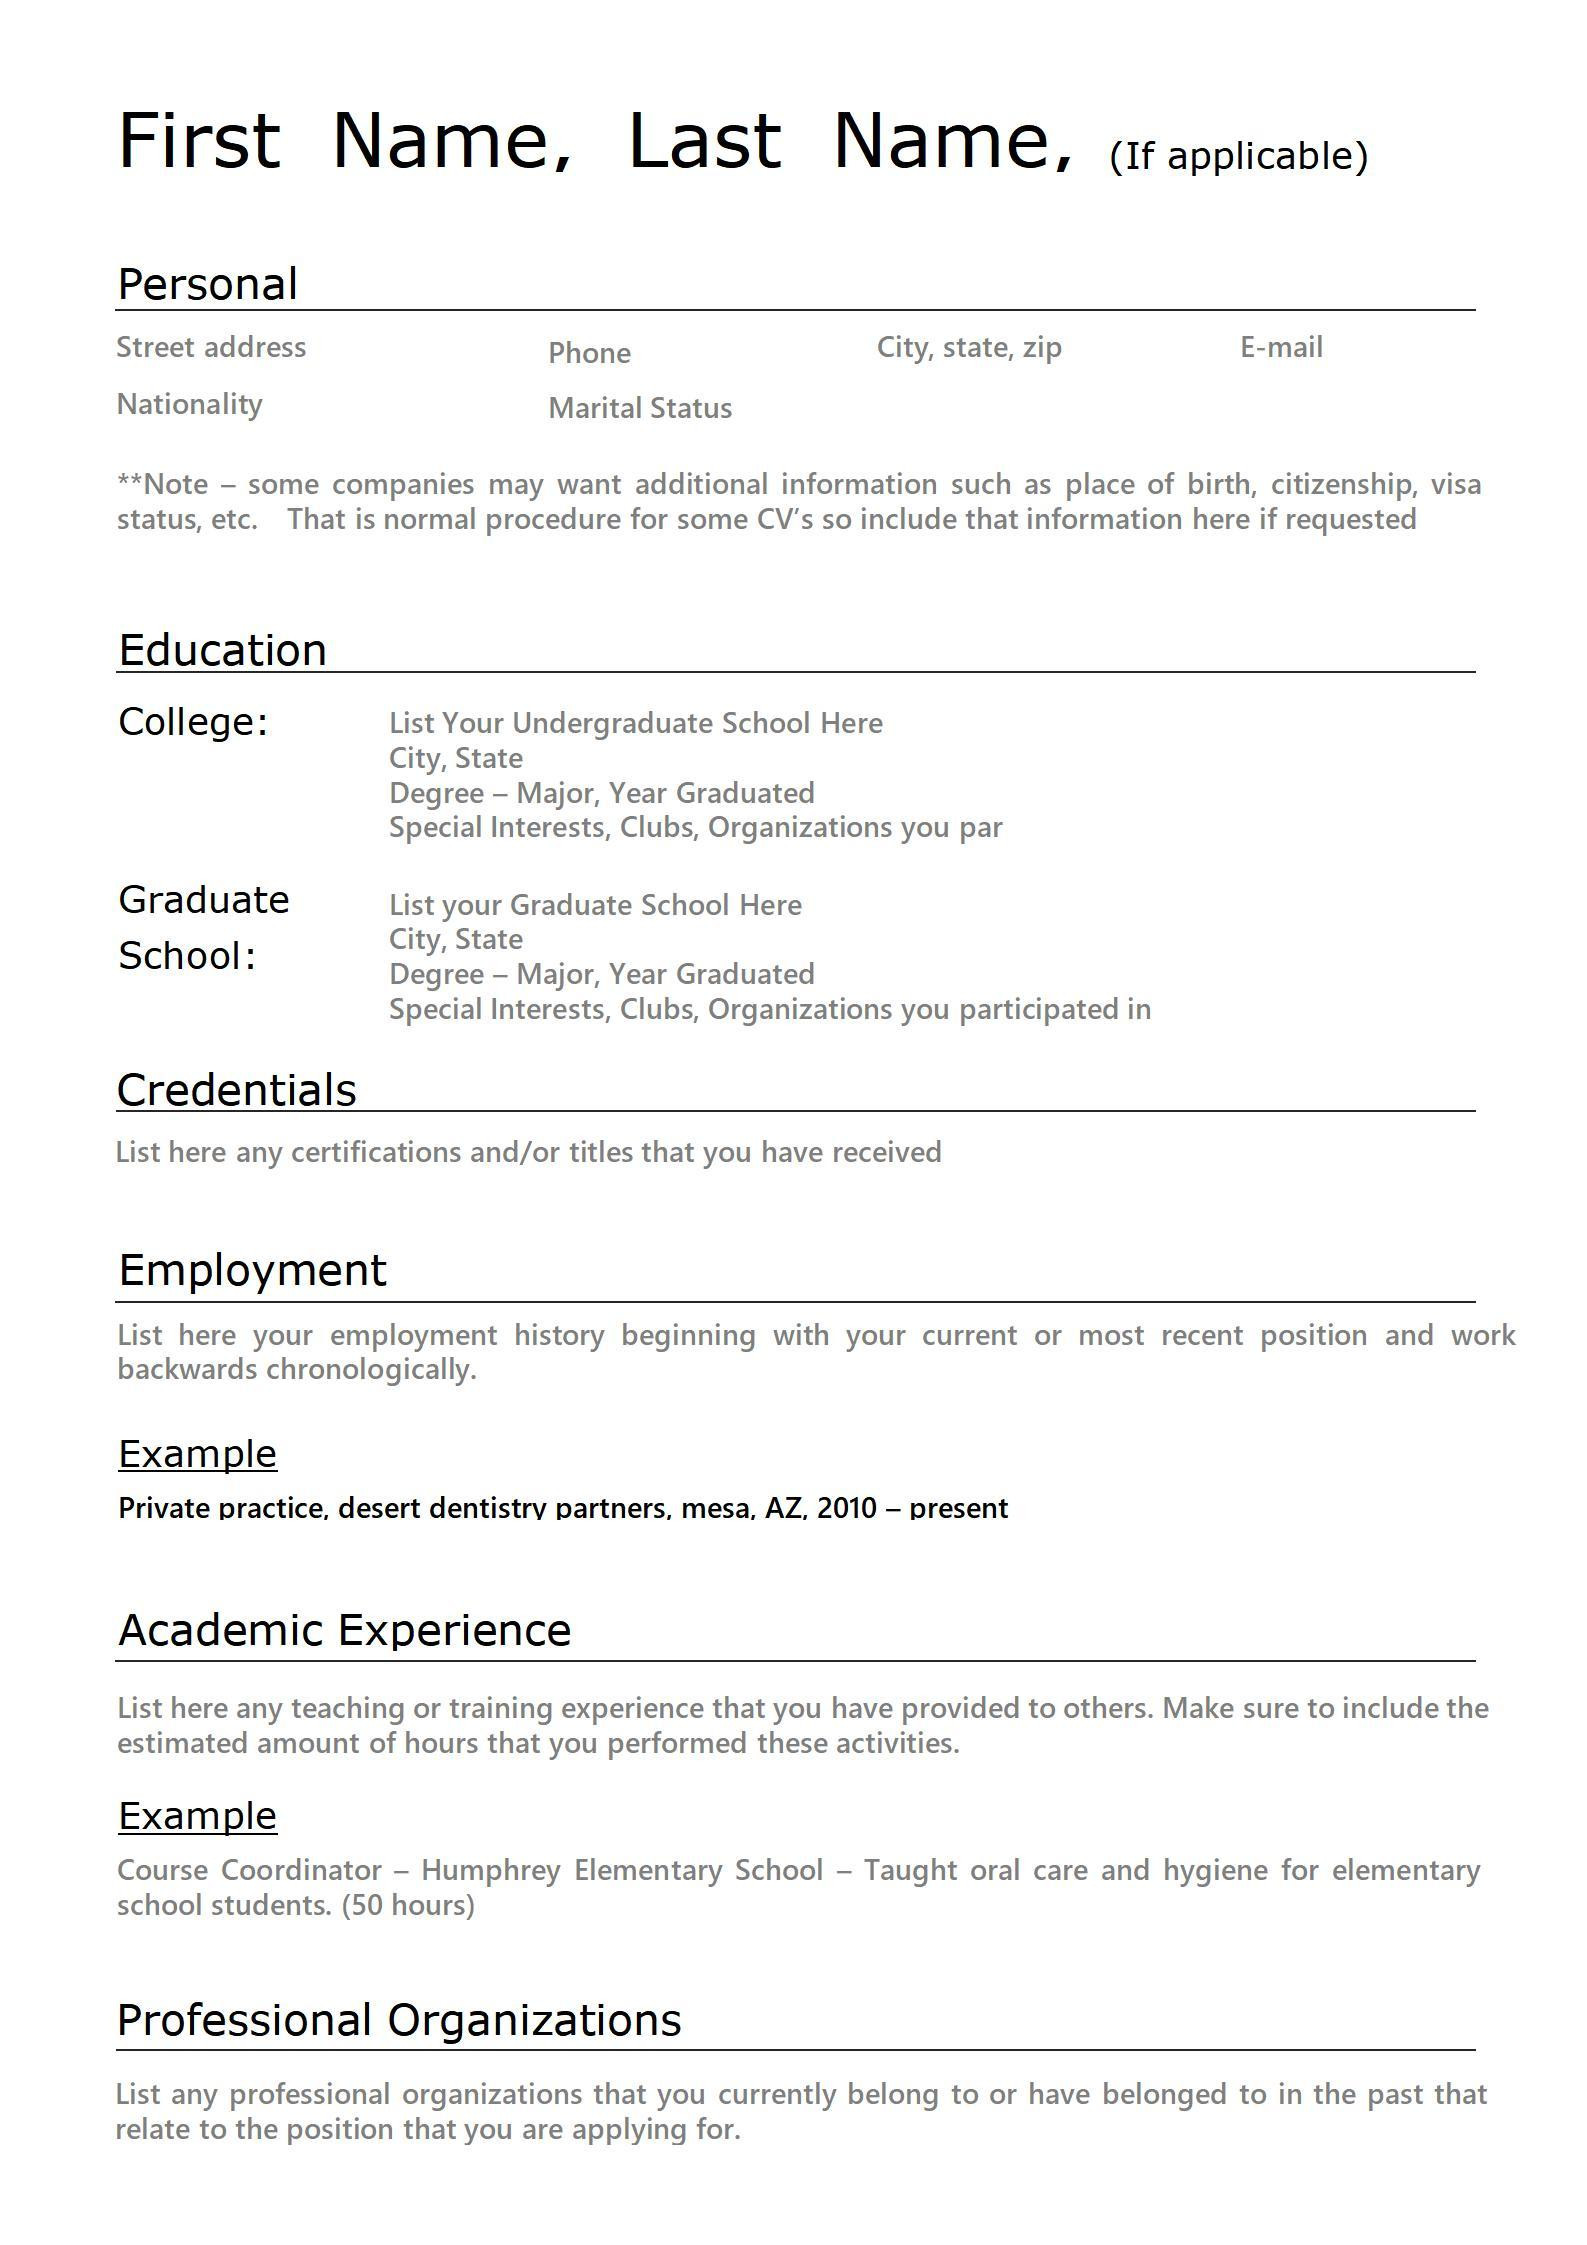 Beginner First Trade Job Resume Samples First-time Resume with No Experience Samples Wps Office Academy